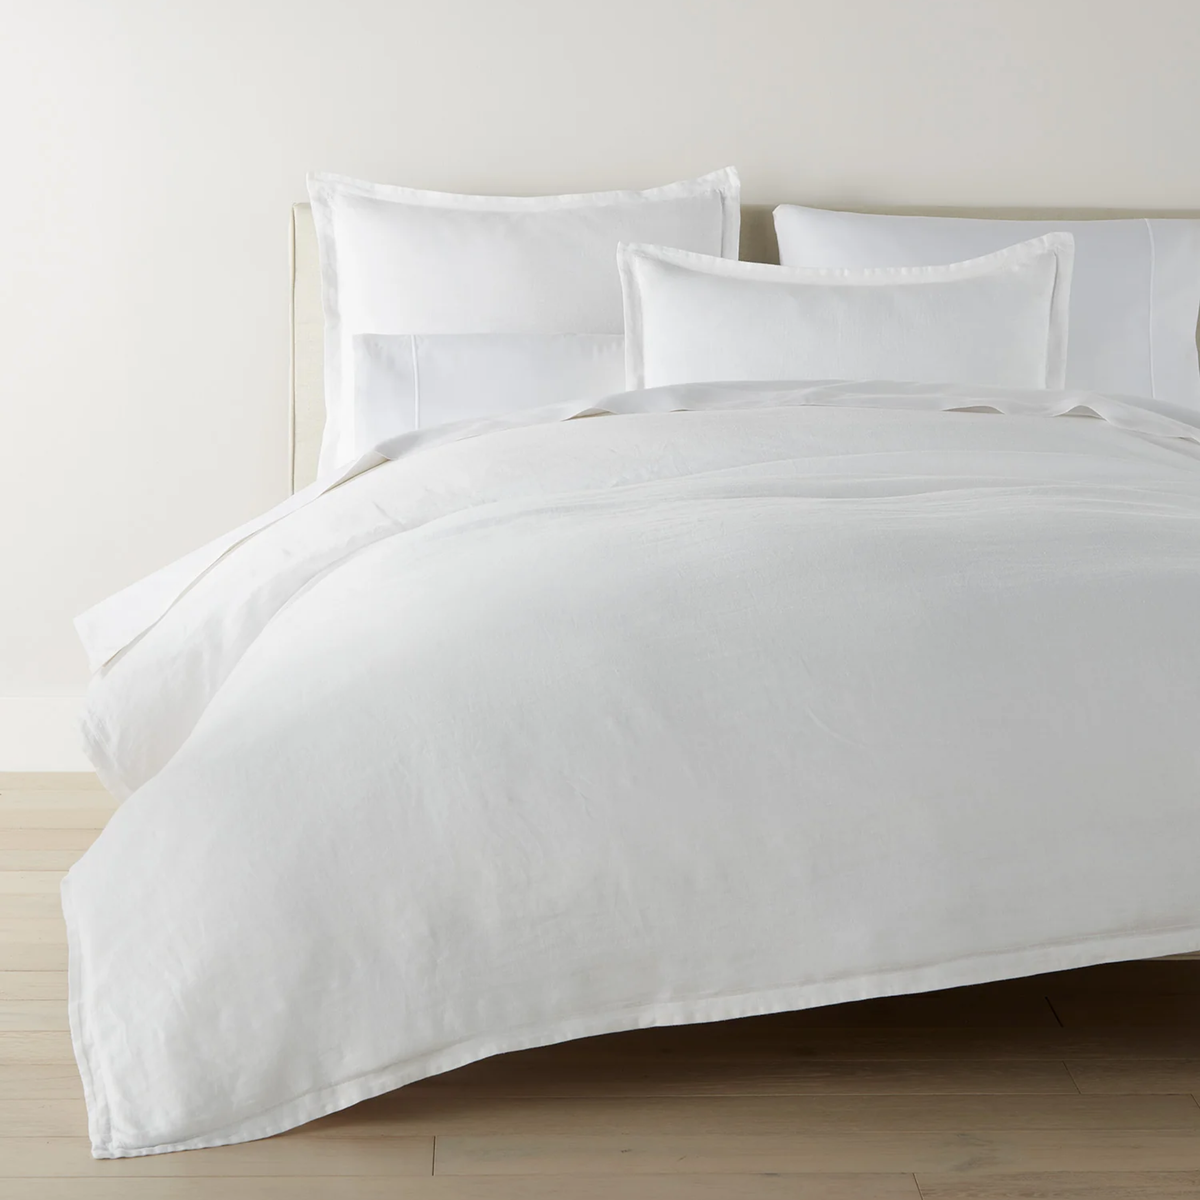 Full Bed Dressed in Peacock Alley European Washed Linen Bedding in White Color